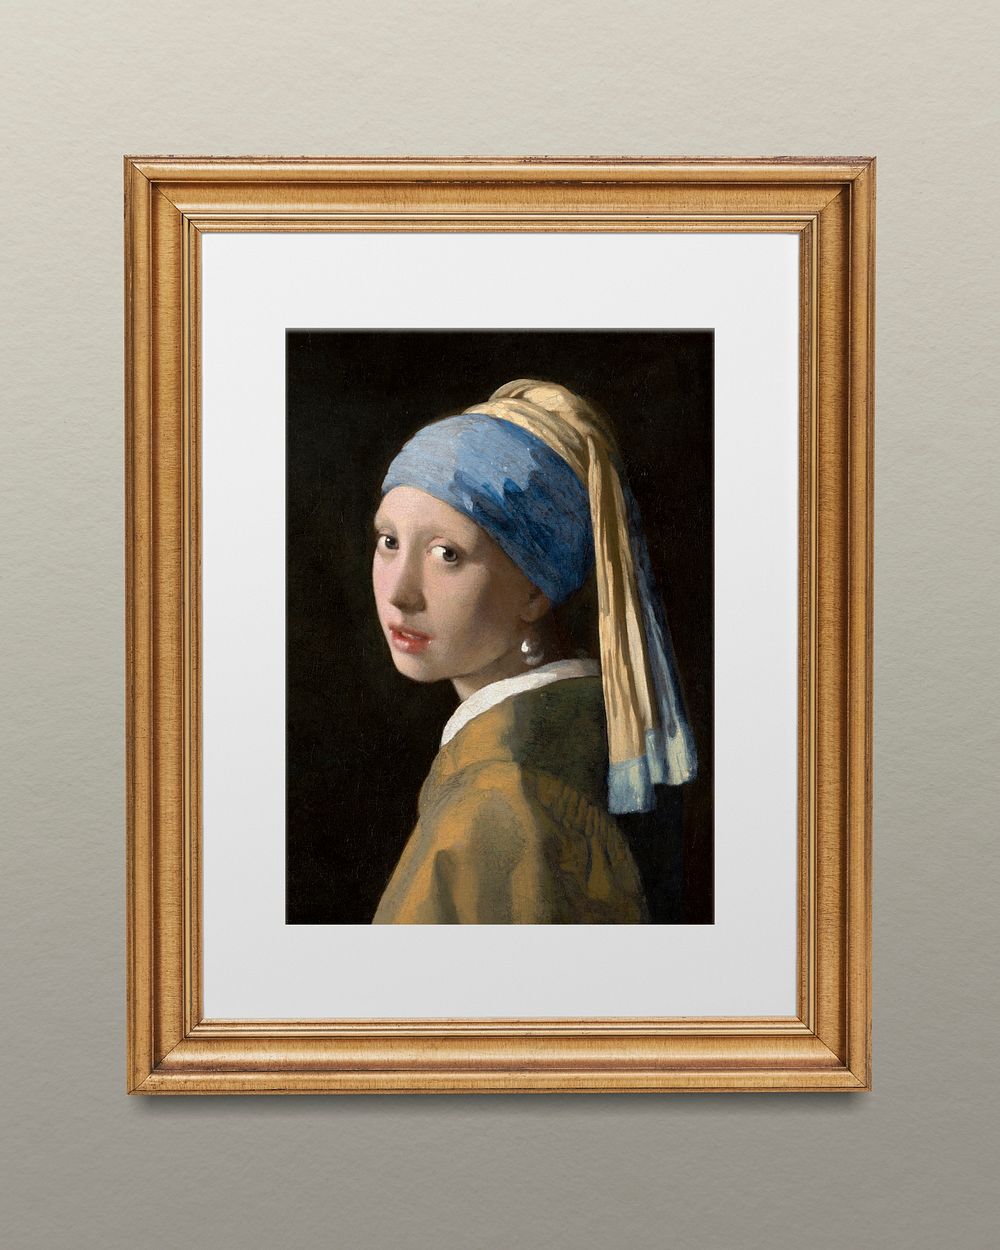 Girl with Pearl Earring frame, vintage design 